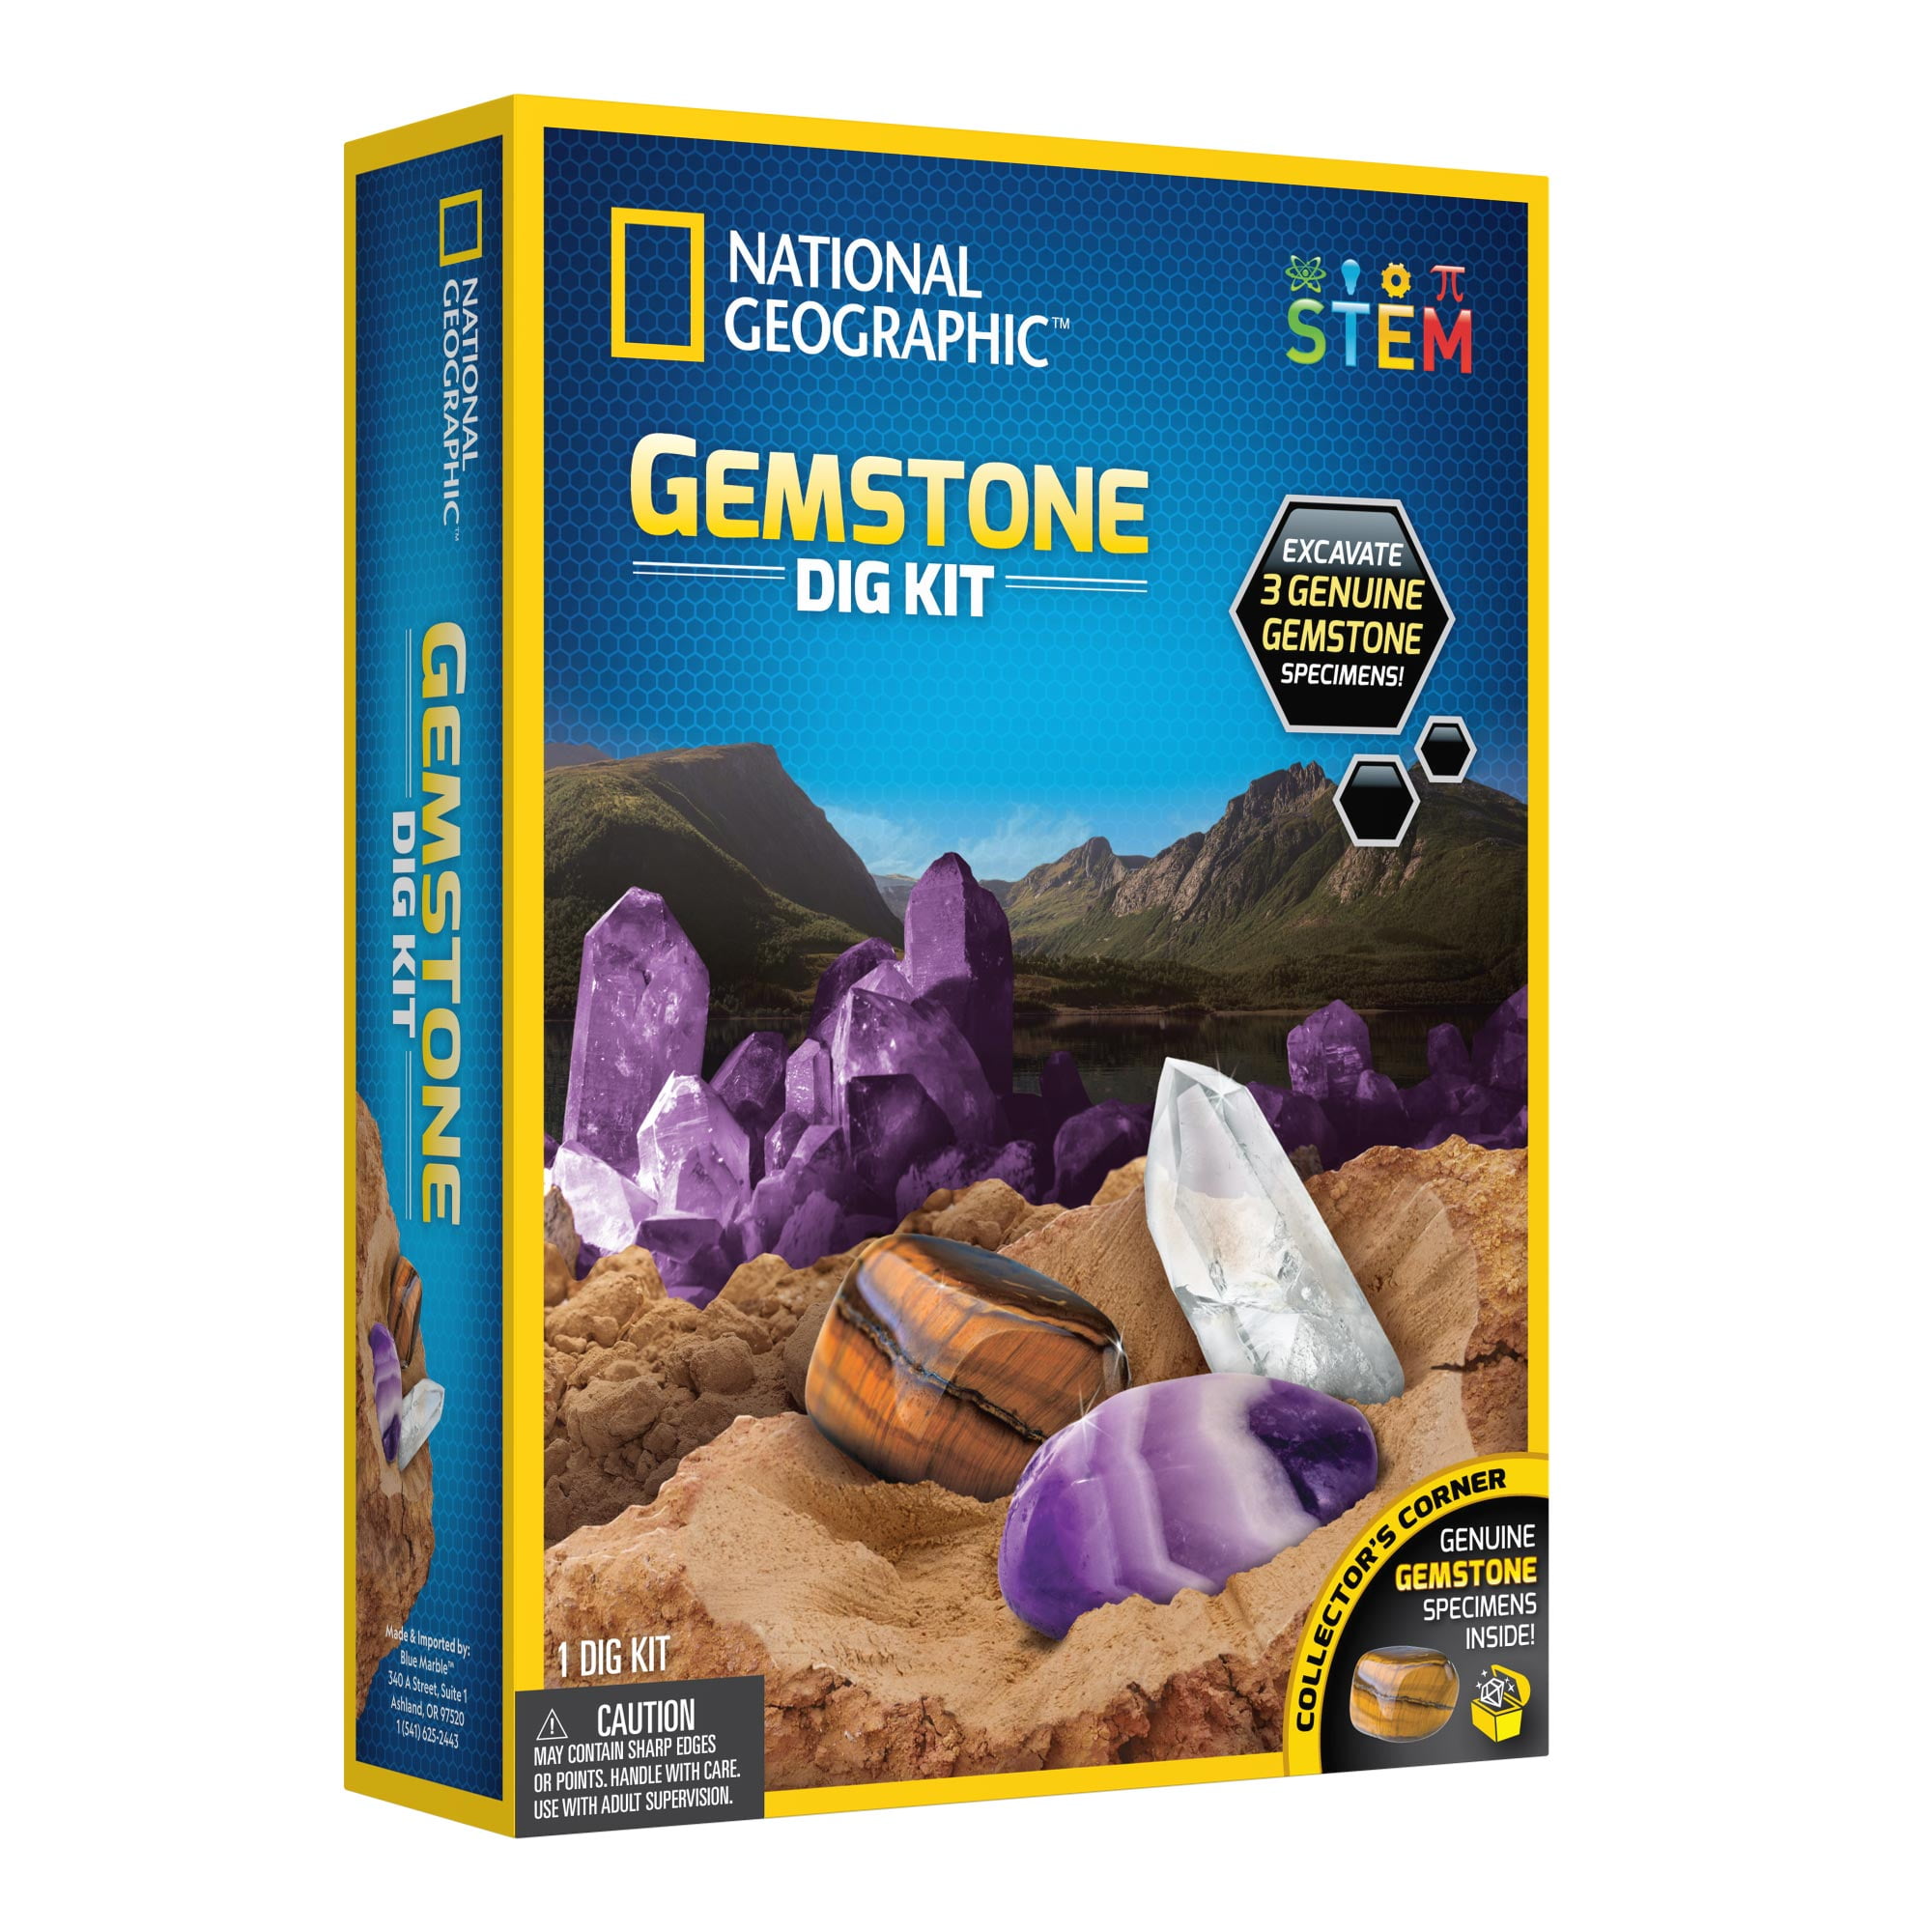 Excavate 10 Real Fossils for sale online National Geographic MEGA Fossil and GEMSTONE Dig Kits 